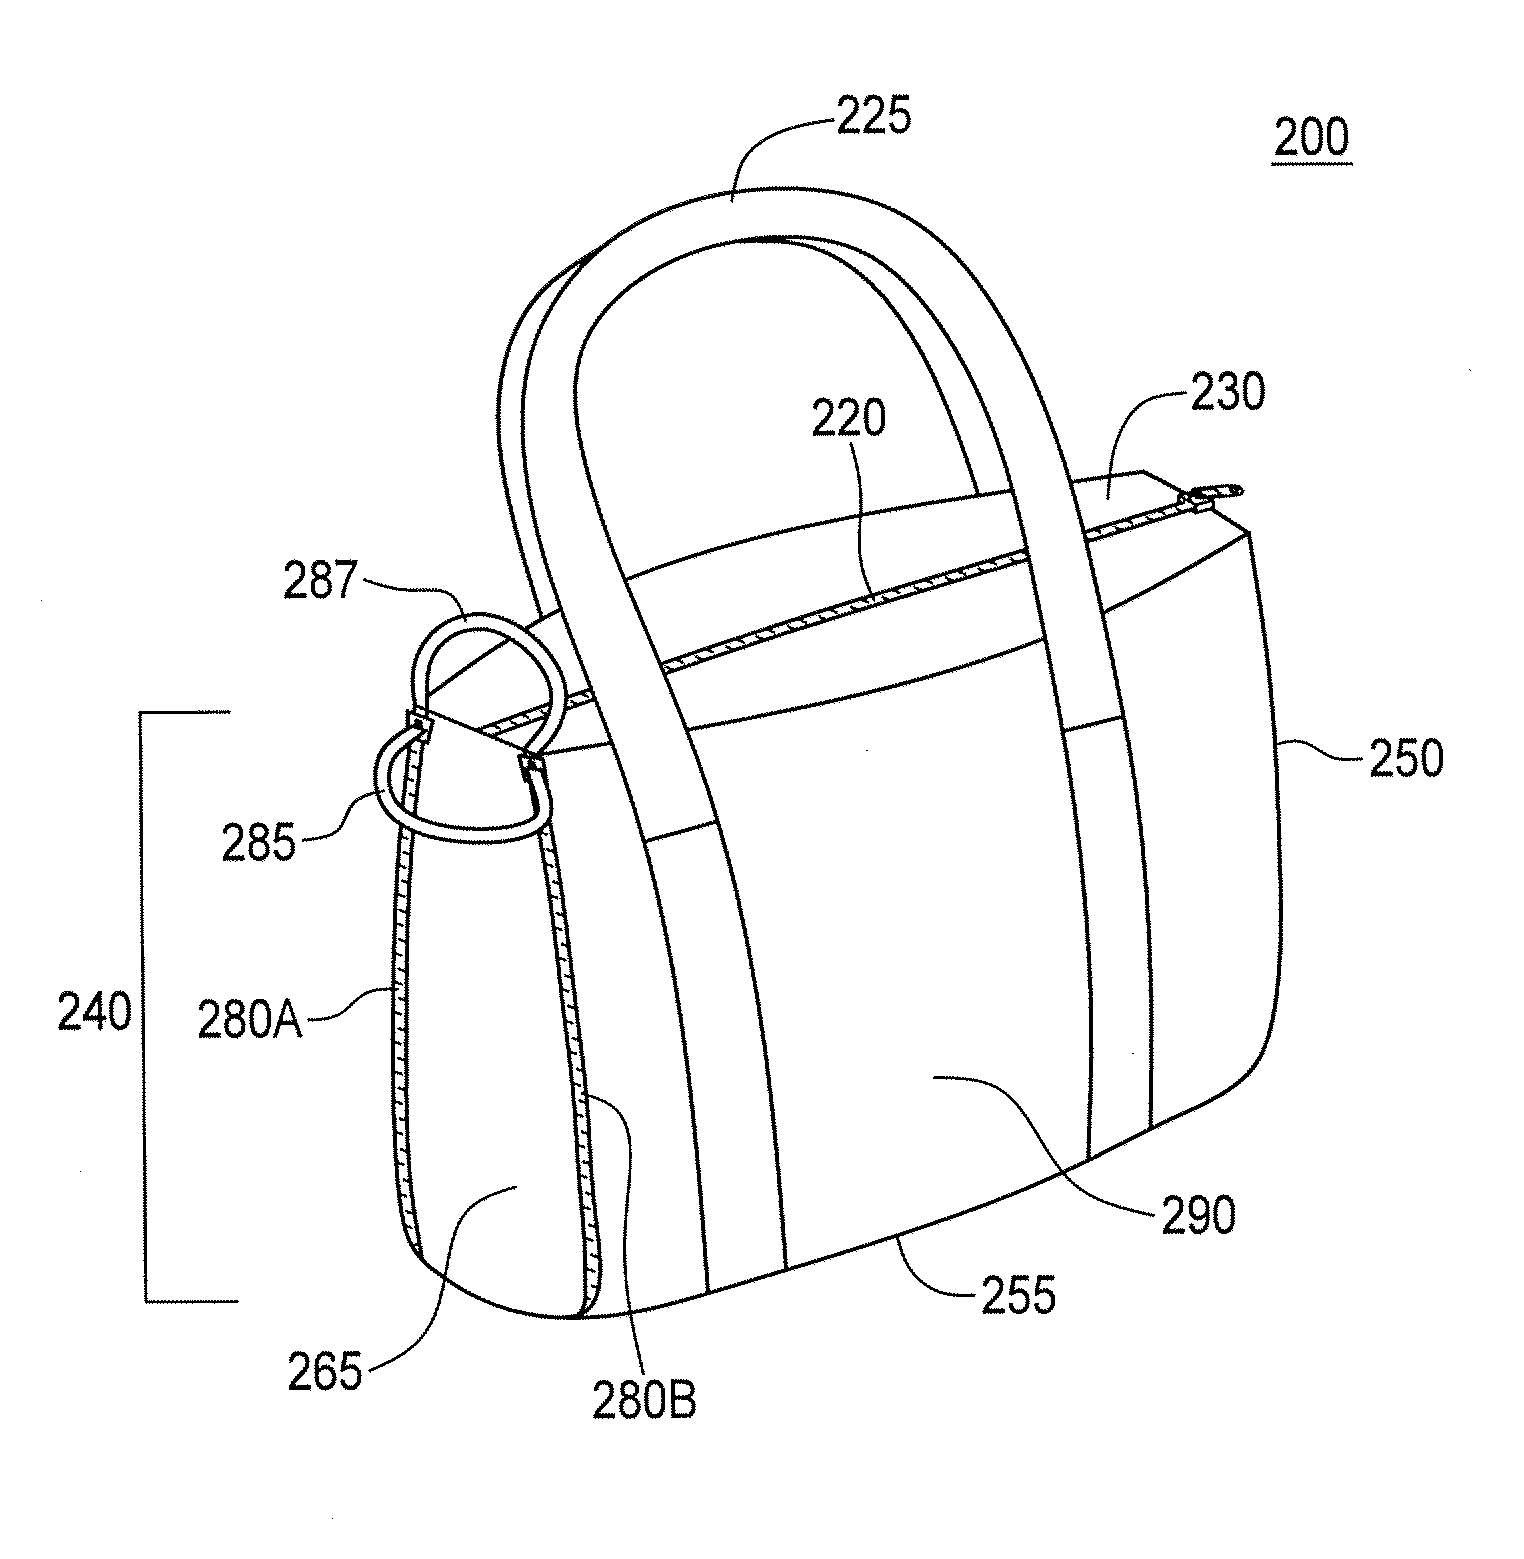 Bag With Easy Access For Cleaning and Aerating